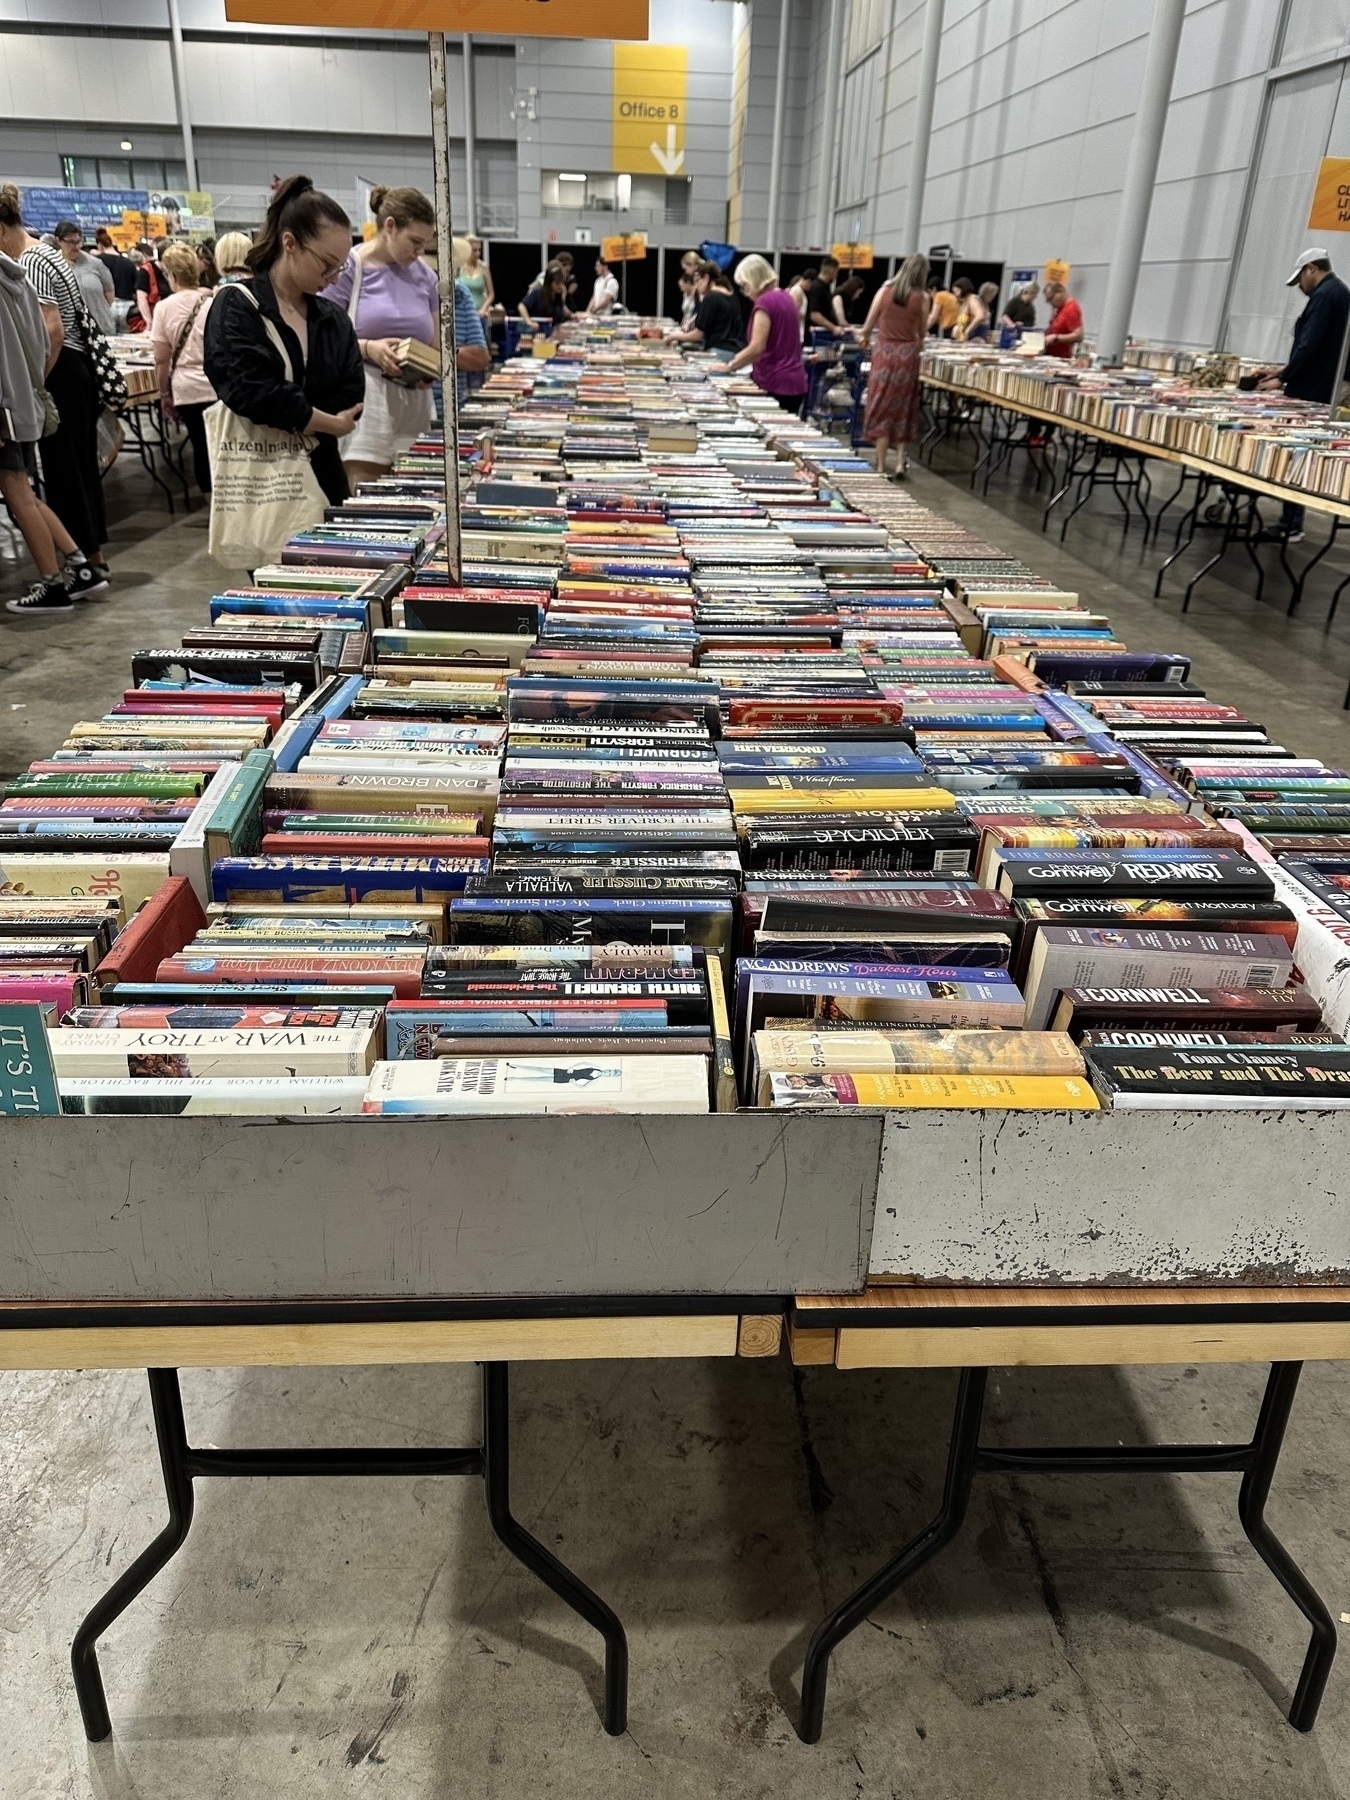 A long row of trestle tables stretching approximately 20m loaded with rows of second hand books.